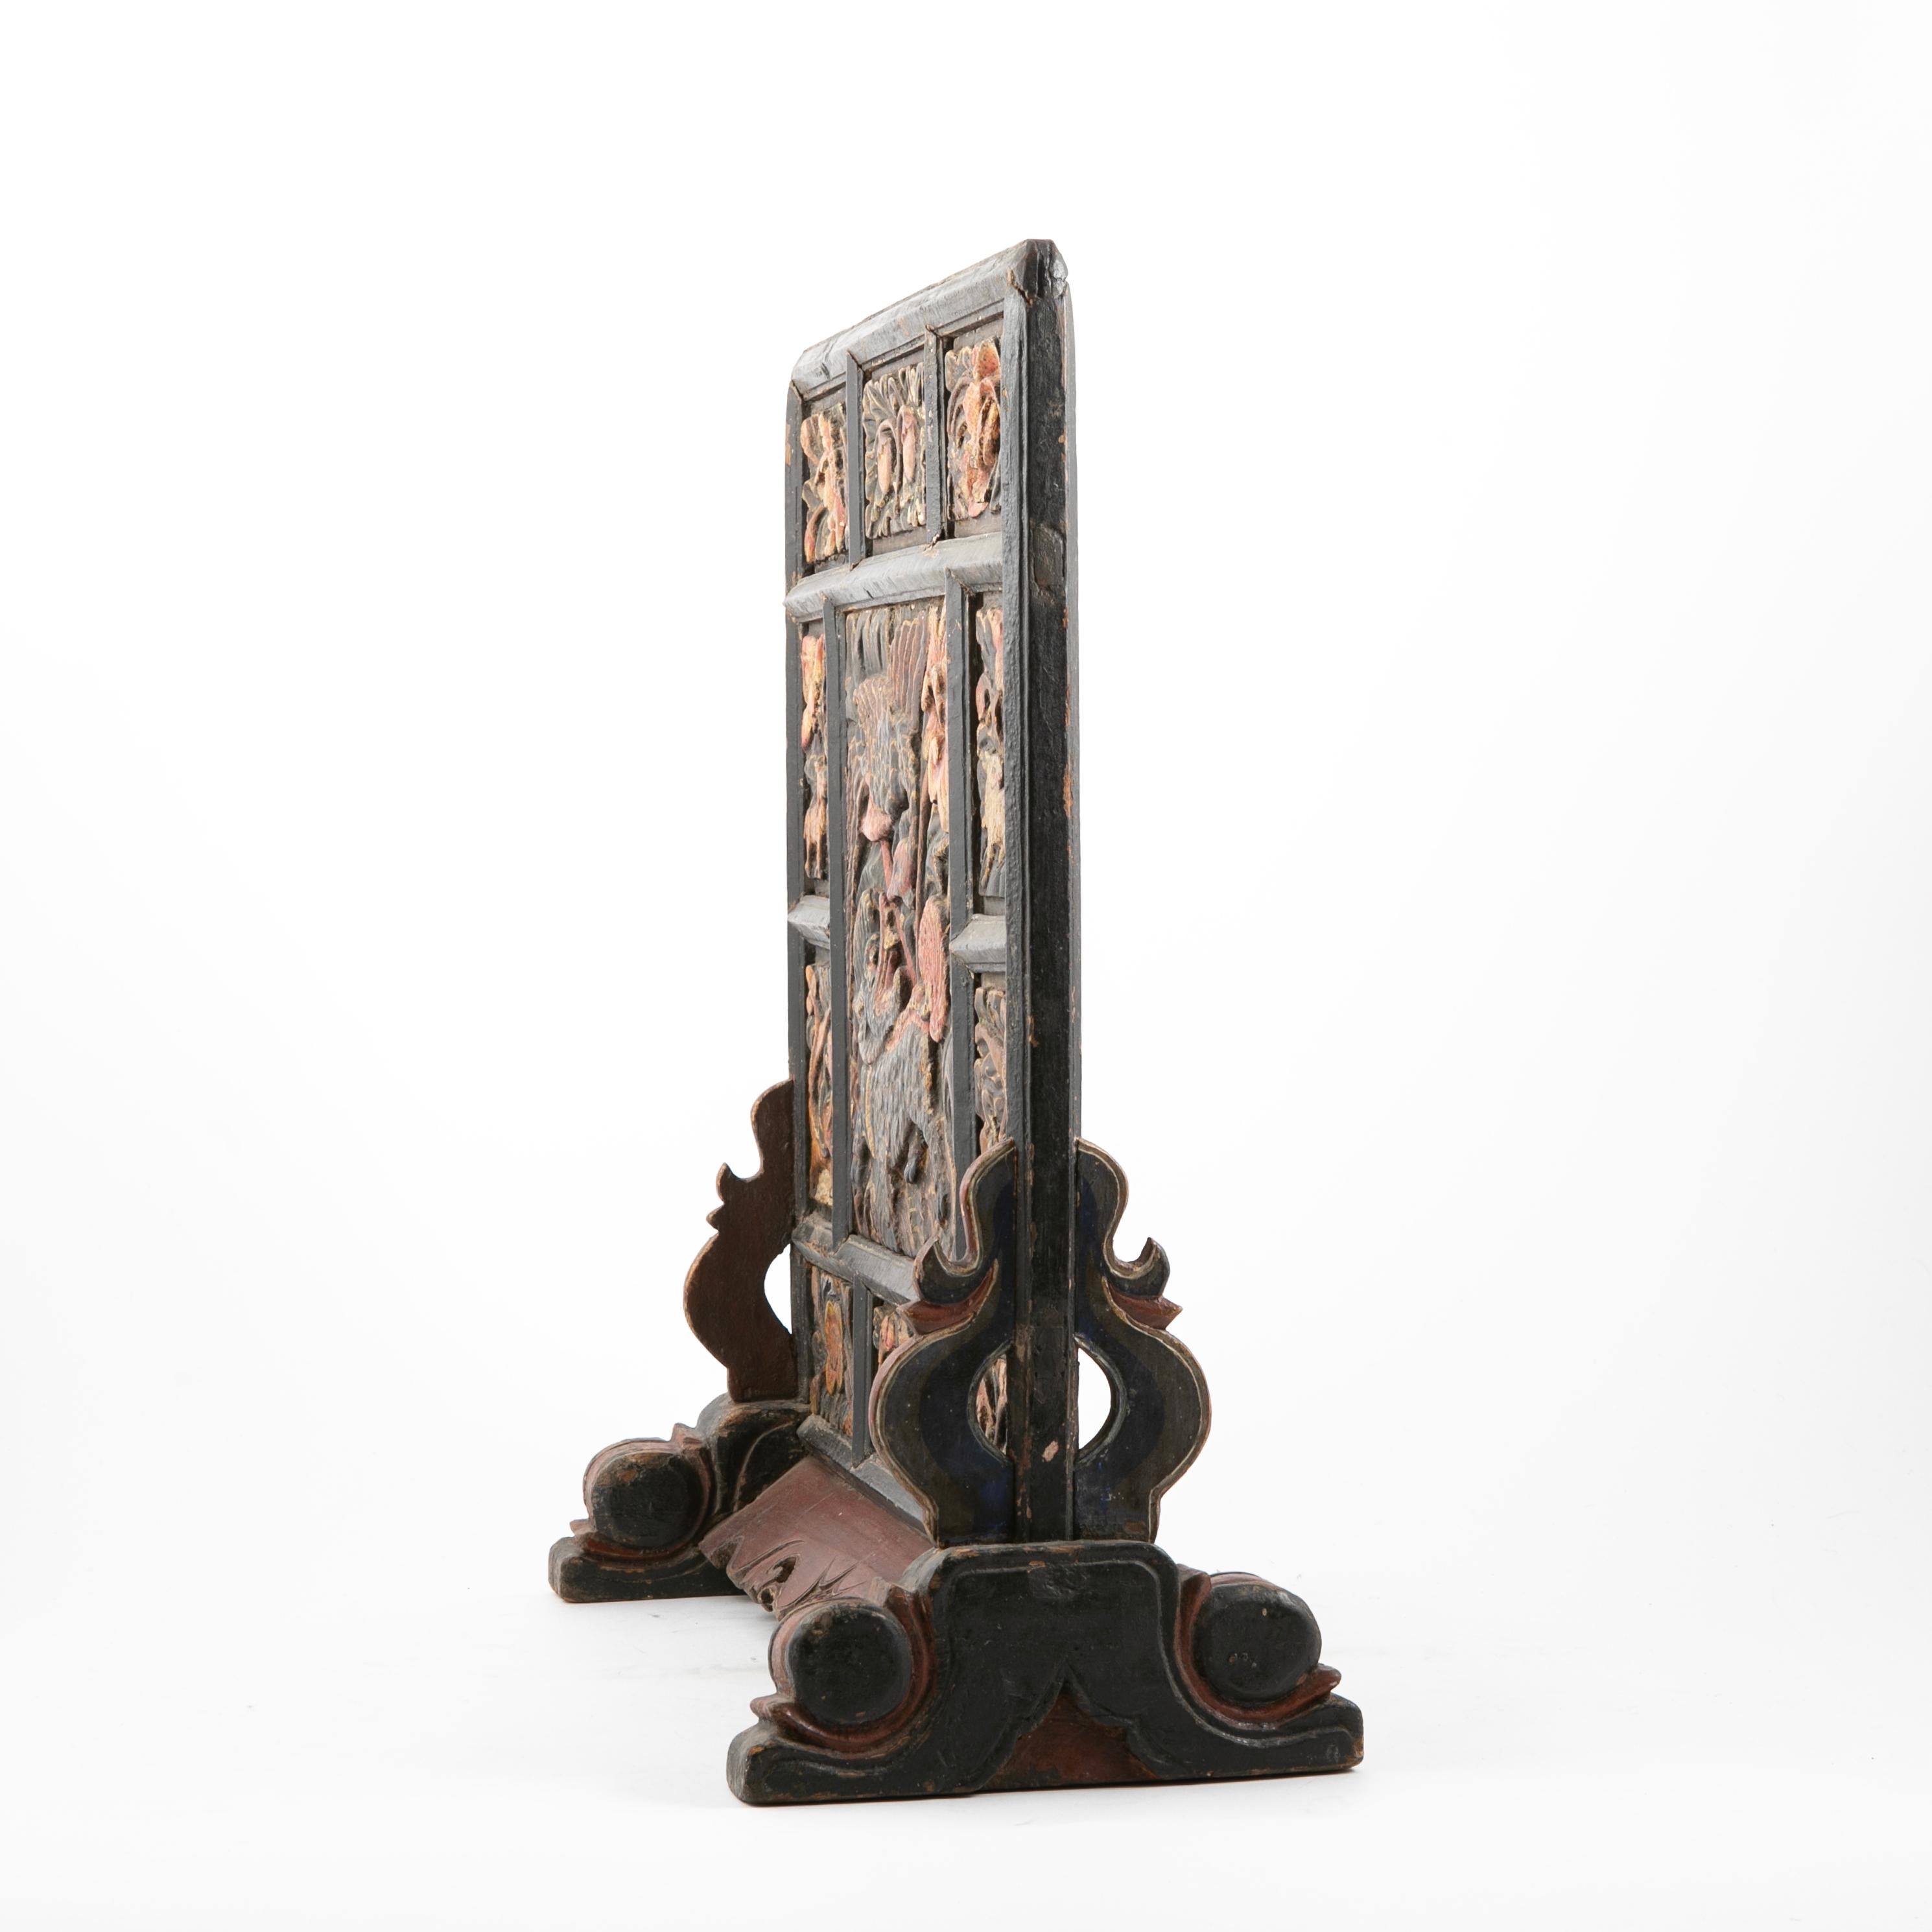 A rare 16-17th cenury Ming Dynasty standing table screen. Untoched original condition.
Hand carved wood, the panel is carved with relief details depicting a dragon, cranes, mythical animals, flowers, etc. painted in polychrome.
Naive in its